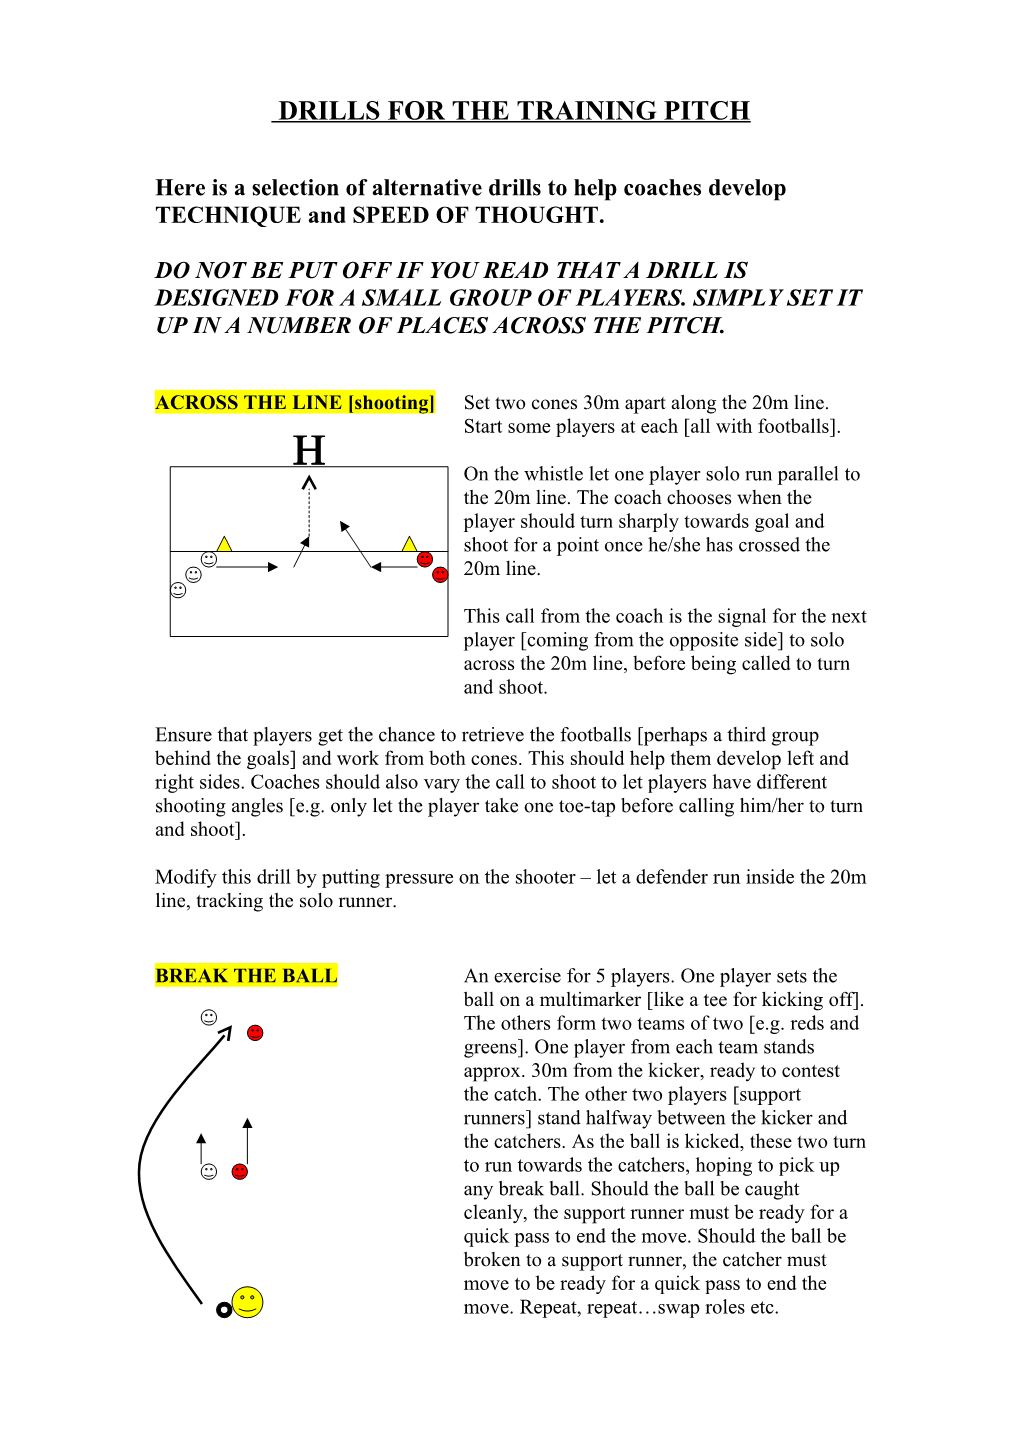 Drills for the Training Pitch